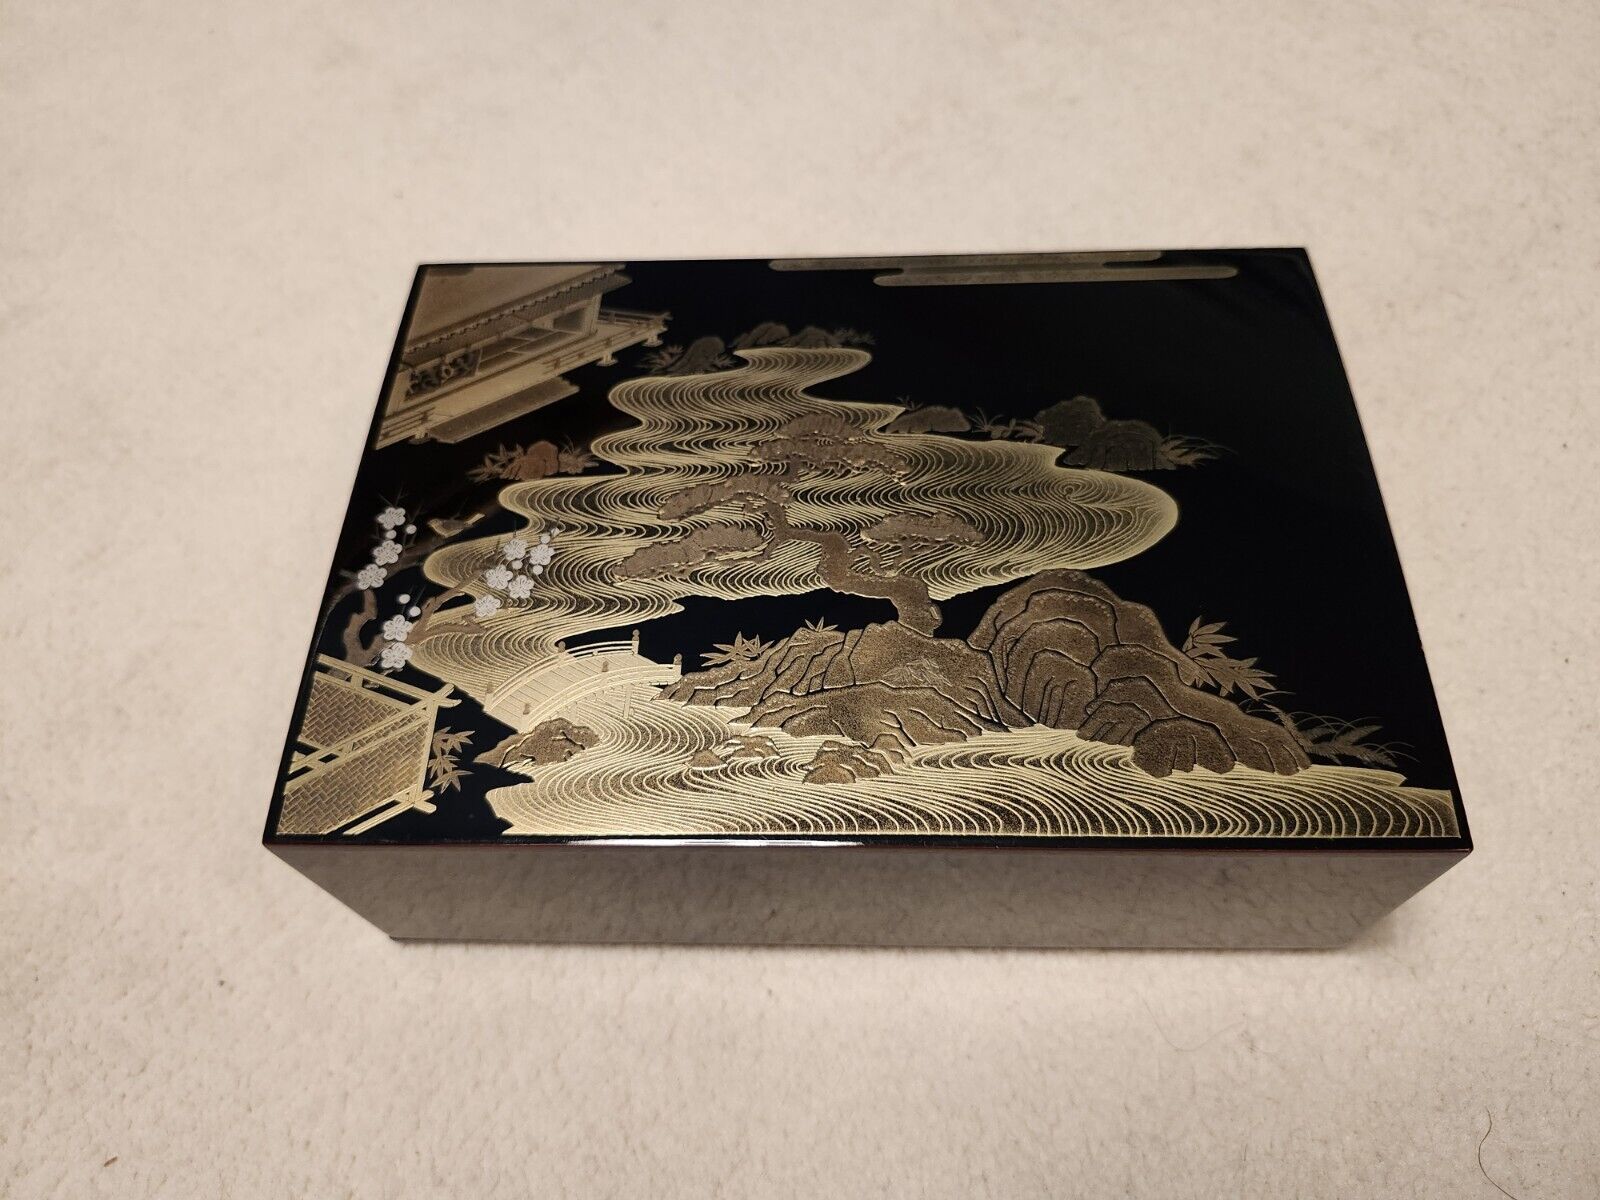 Vintage Japanese Lacquered Wooden Jewelry Case with Gold-Etched River Scene